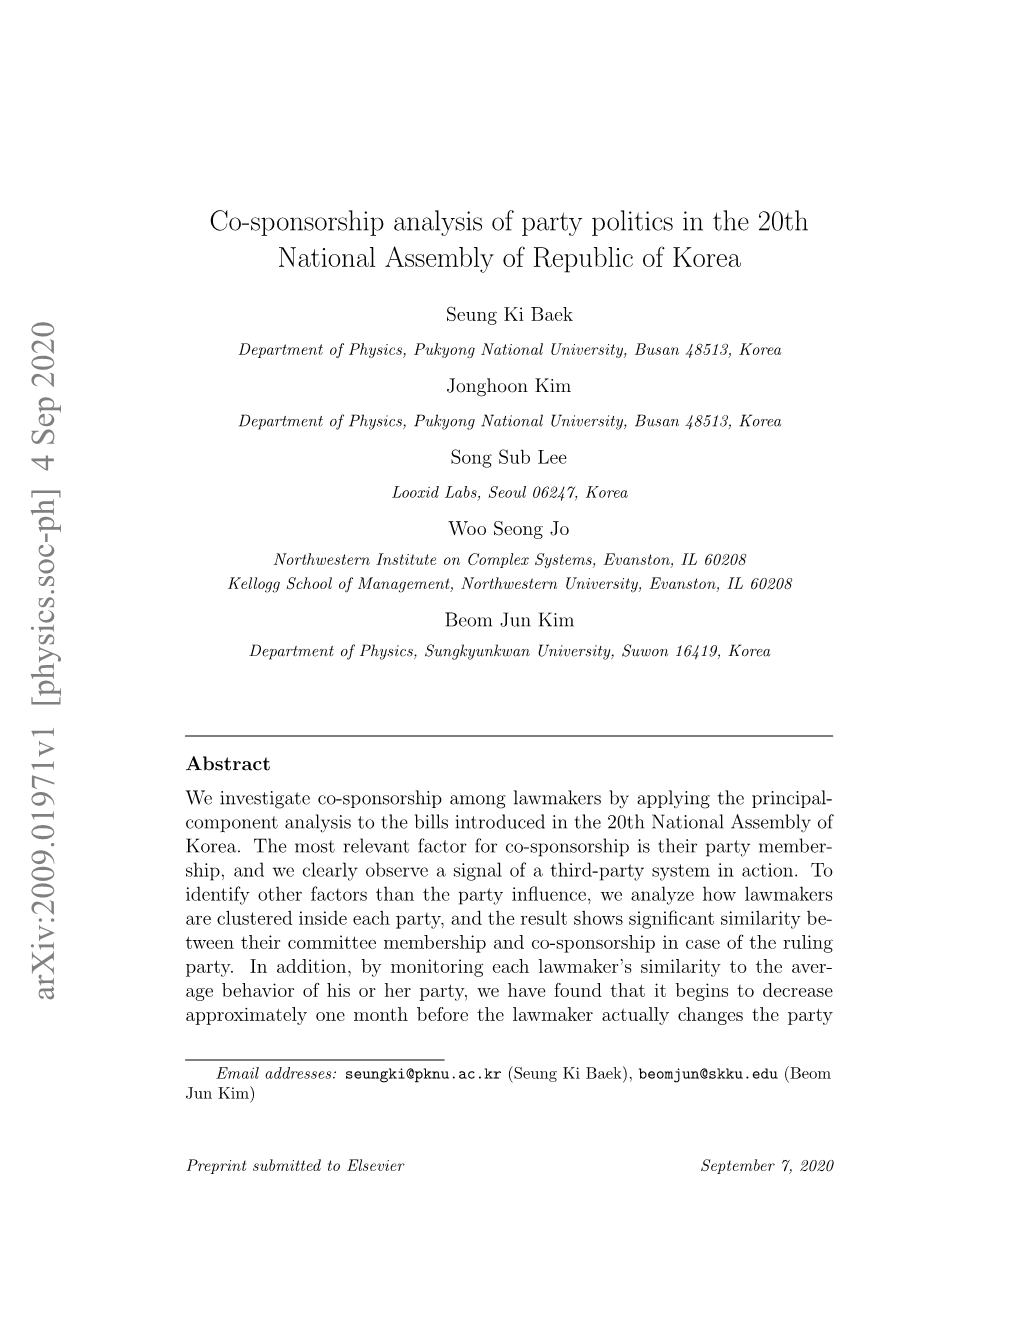 Co-Sponsorship Analysis of Party Politics in the 20Th National Assembly of Republic of Korea